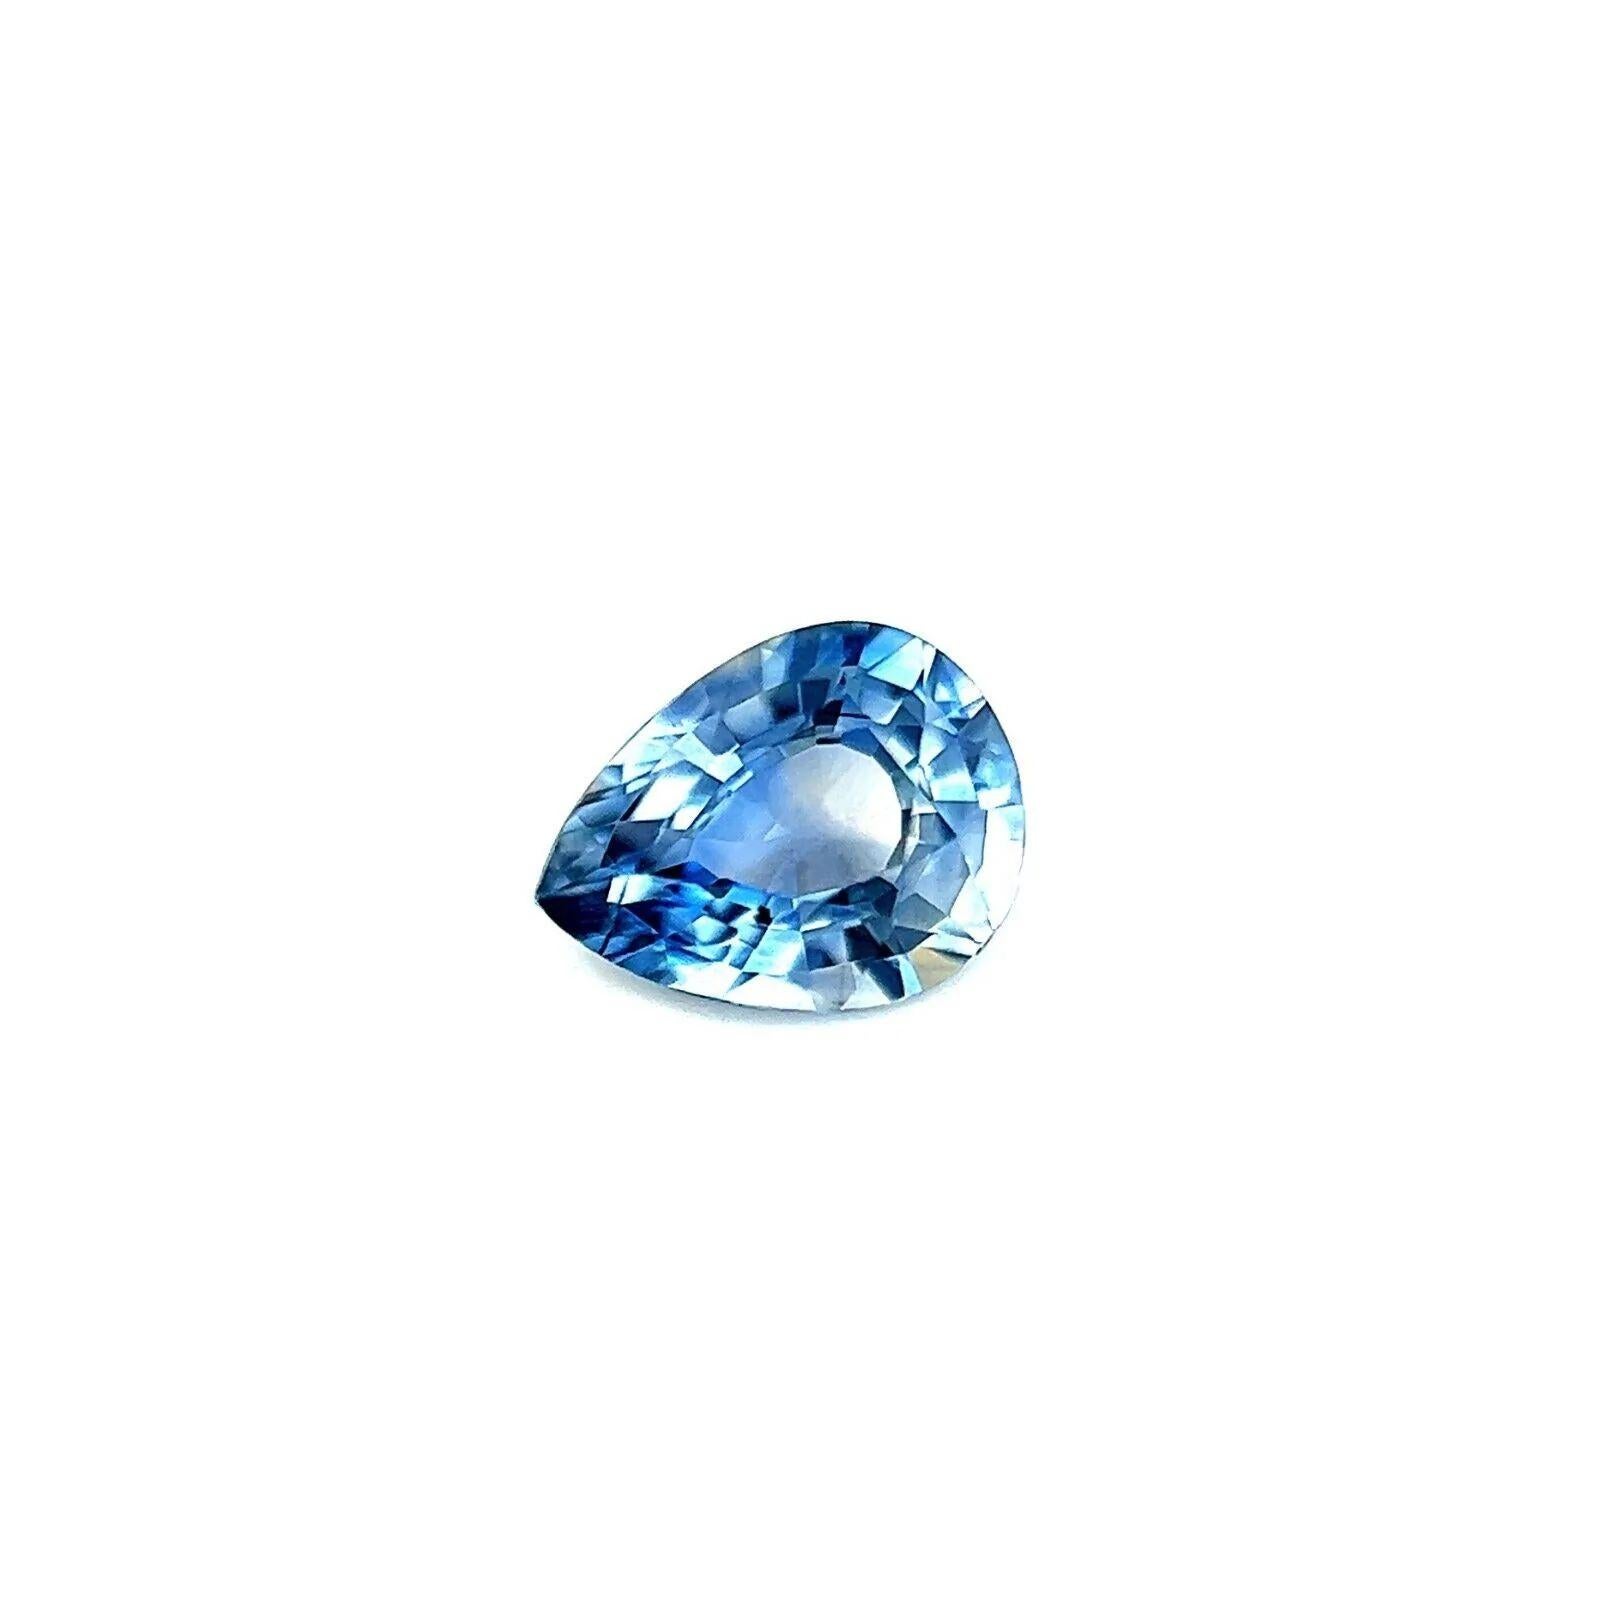 Untreated Sapphire Light Greenish Blue 0.72ct Pear Cut 6x4.8mm Vvs Gem

Natural Untreated Light Blue Green Sapphire.
0.72 Carat with a beautiful light blue green colour and an excellent pear cut and ideal polish to show great shine and colour, would